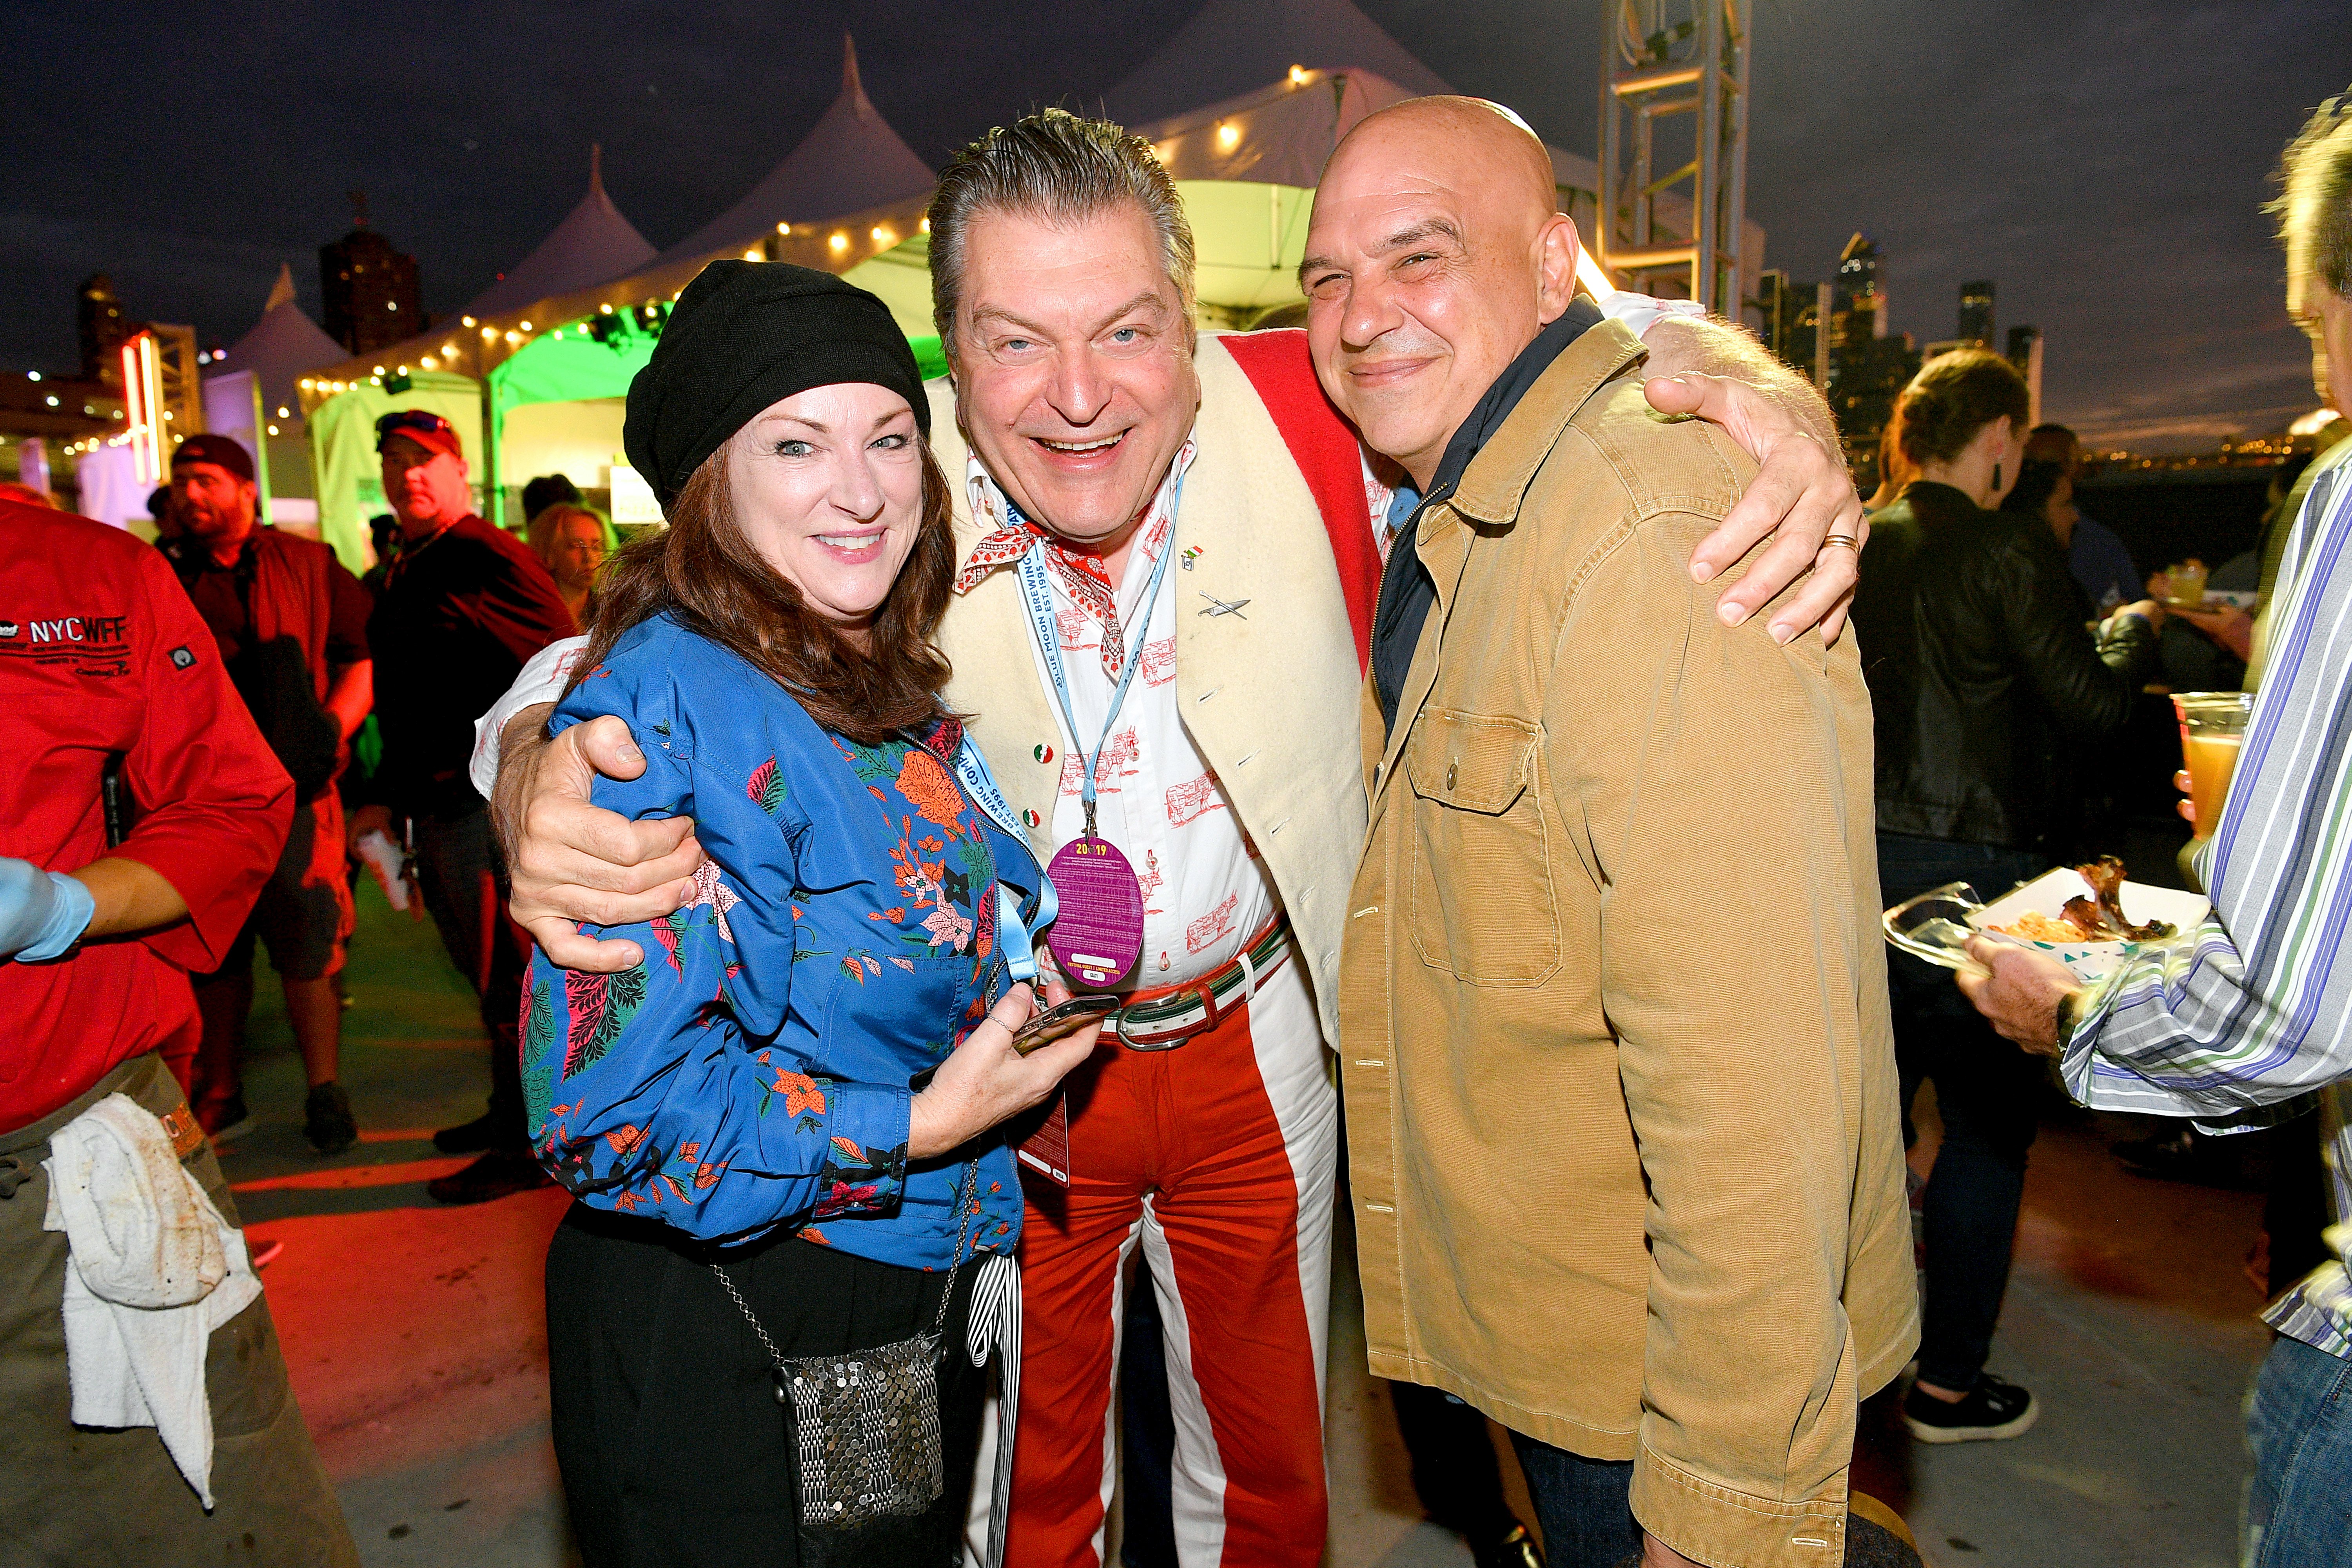 Liz Shanahan, Dario Cecchini and Michael Symon during Titans of BBQ at Pier 97 on October 12, 2019 in New York City. / Source: Getty Images